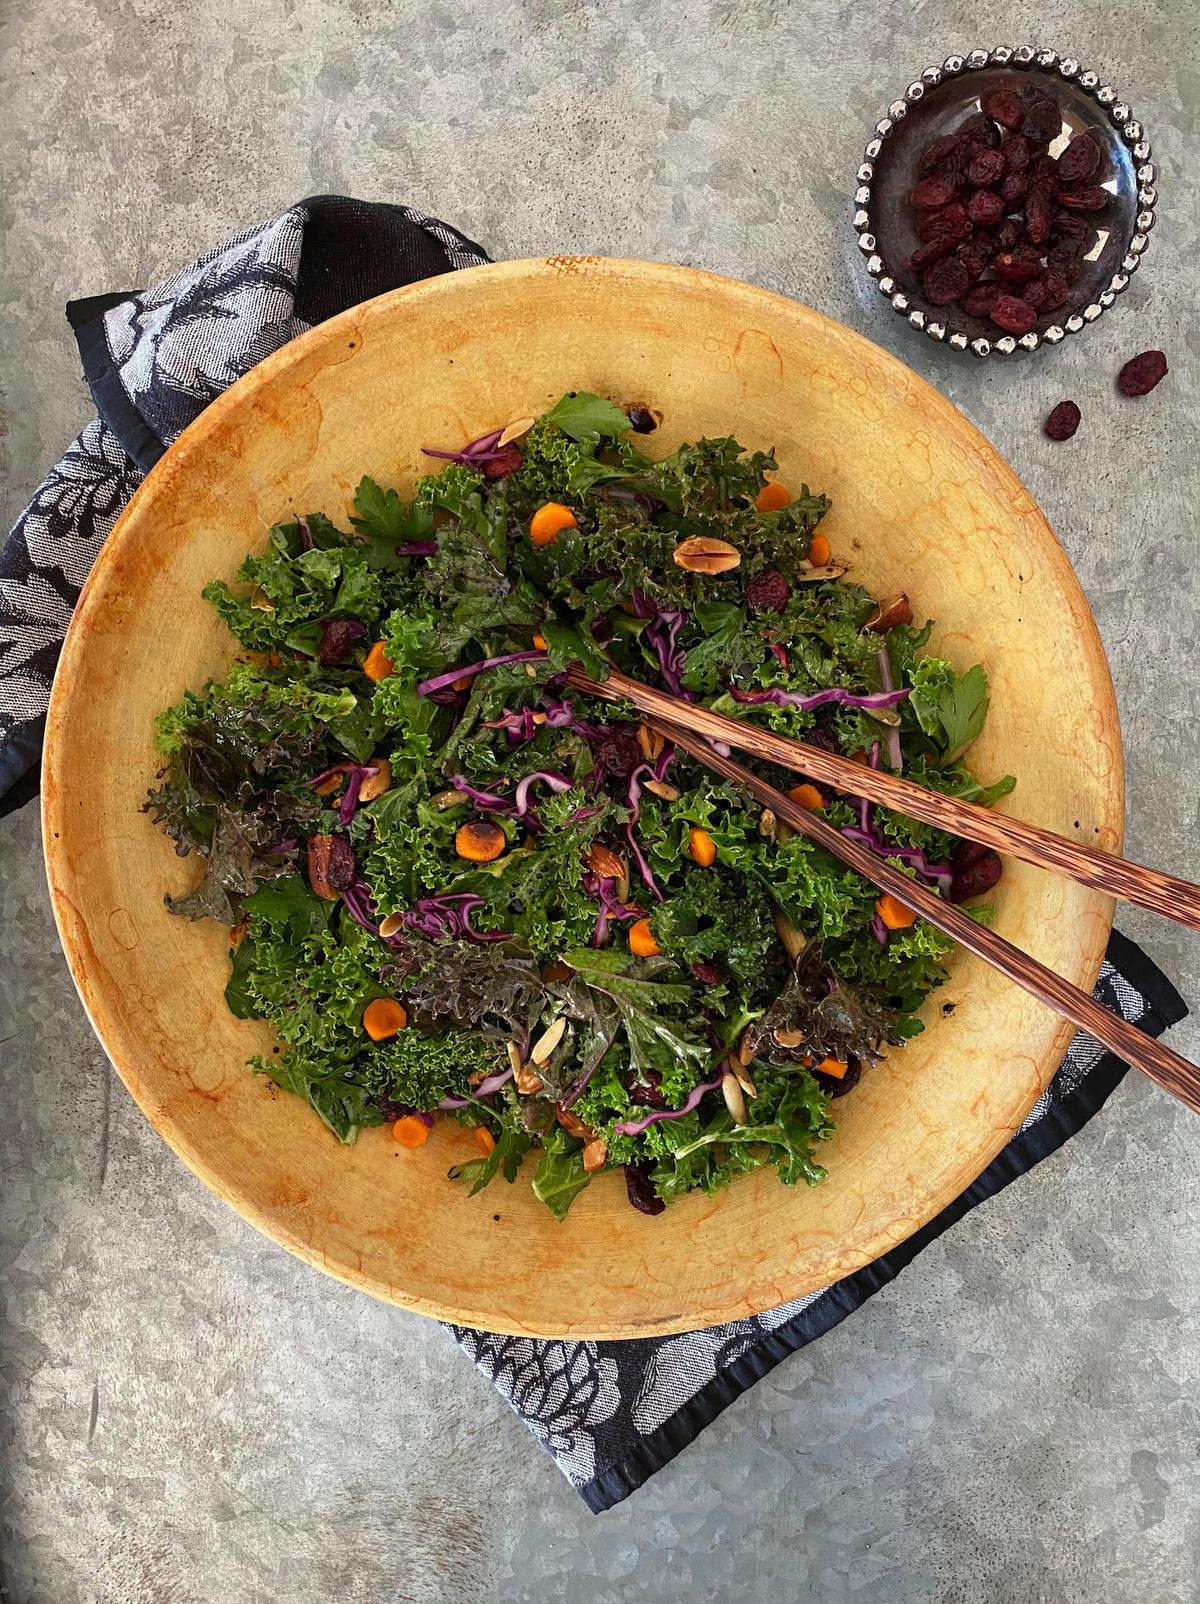 A mountain of kale leaves mingle with almonds, dried cranberries, and pumpkin seeds, bound together by a robust balsamic vinaigrette. (Lynda Balslev for Tastefood)